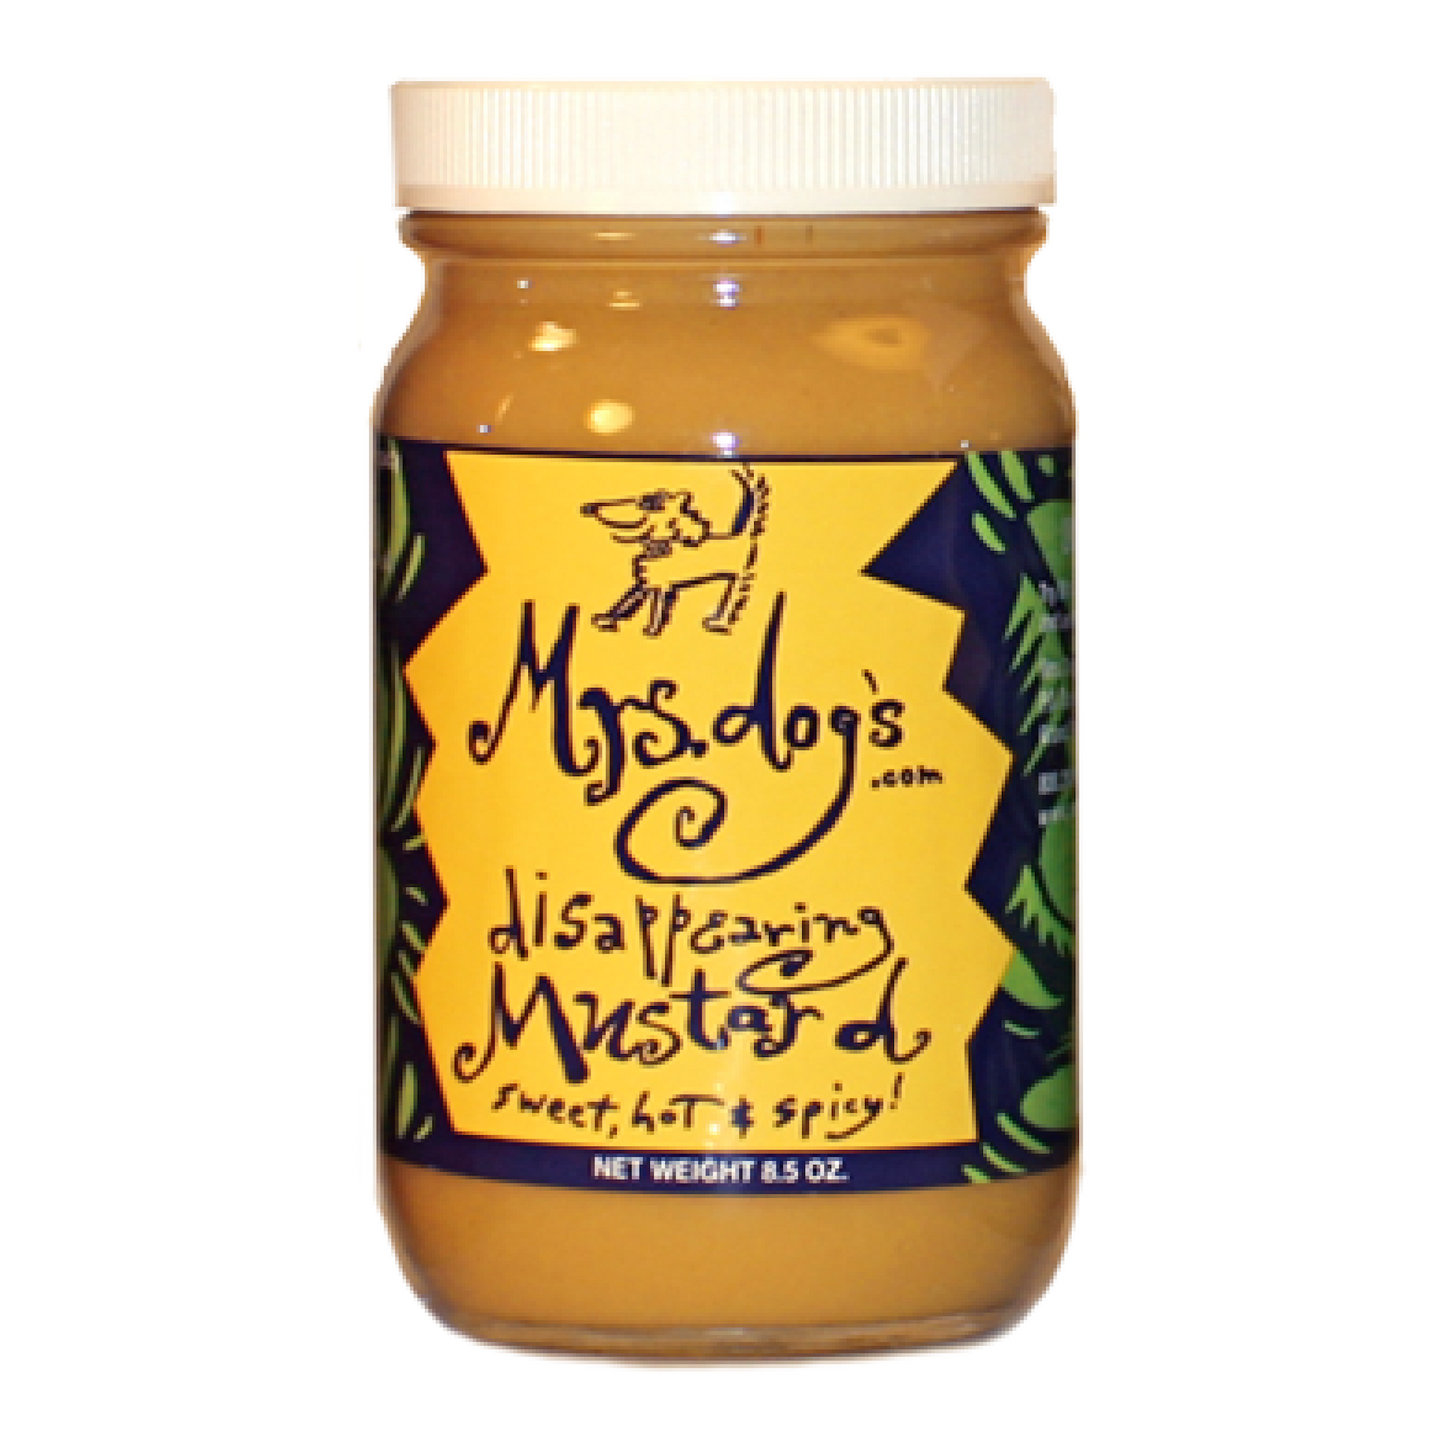 Mrs. Dog's Disappearing Mustard